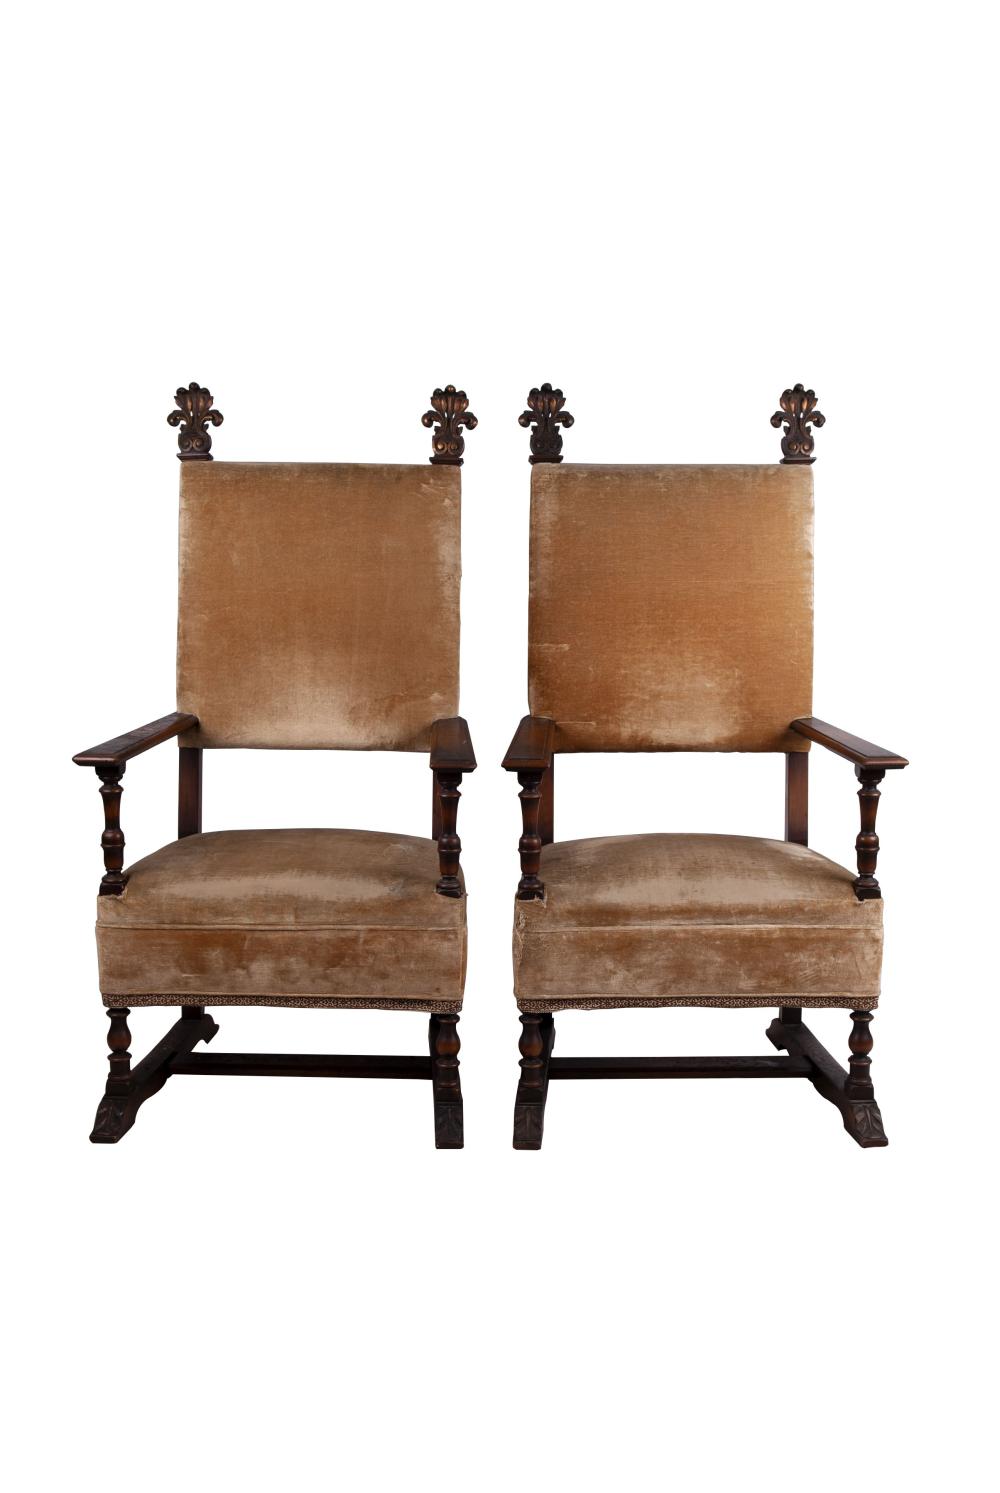 PAIR OF WALNUT HALL CHAIRSwith